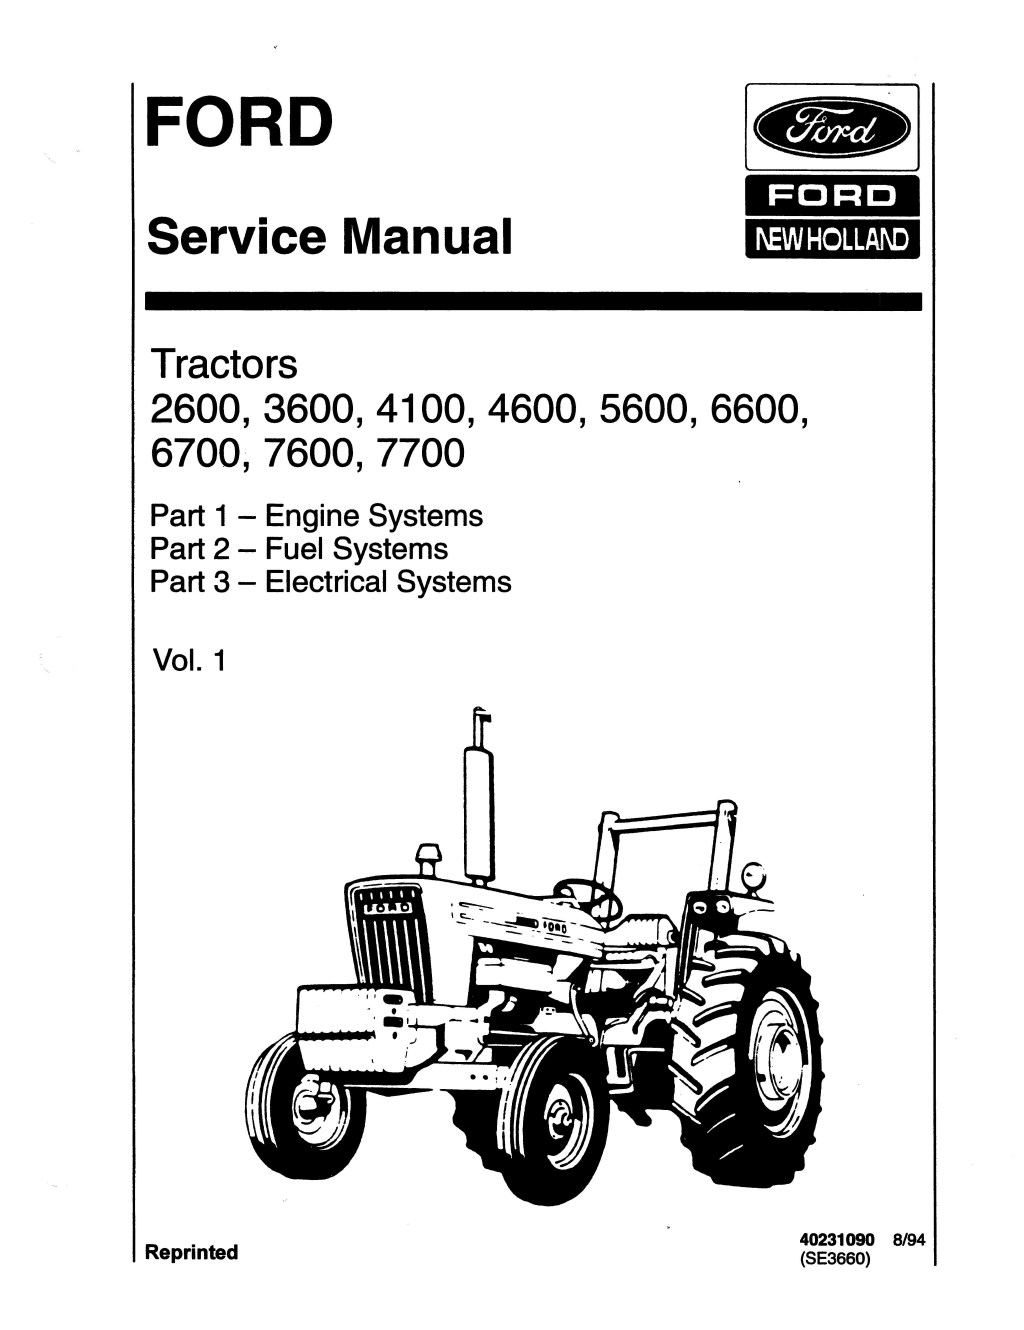 Picture of: Ford  Tractor Service Repair Manual by kmdisiodok – Issuu